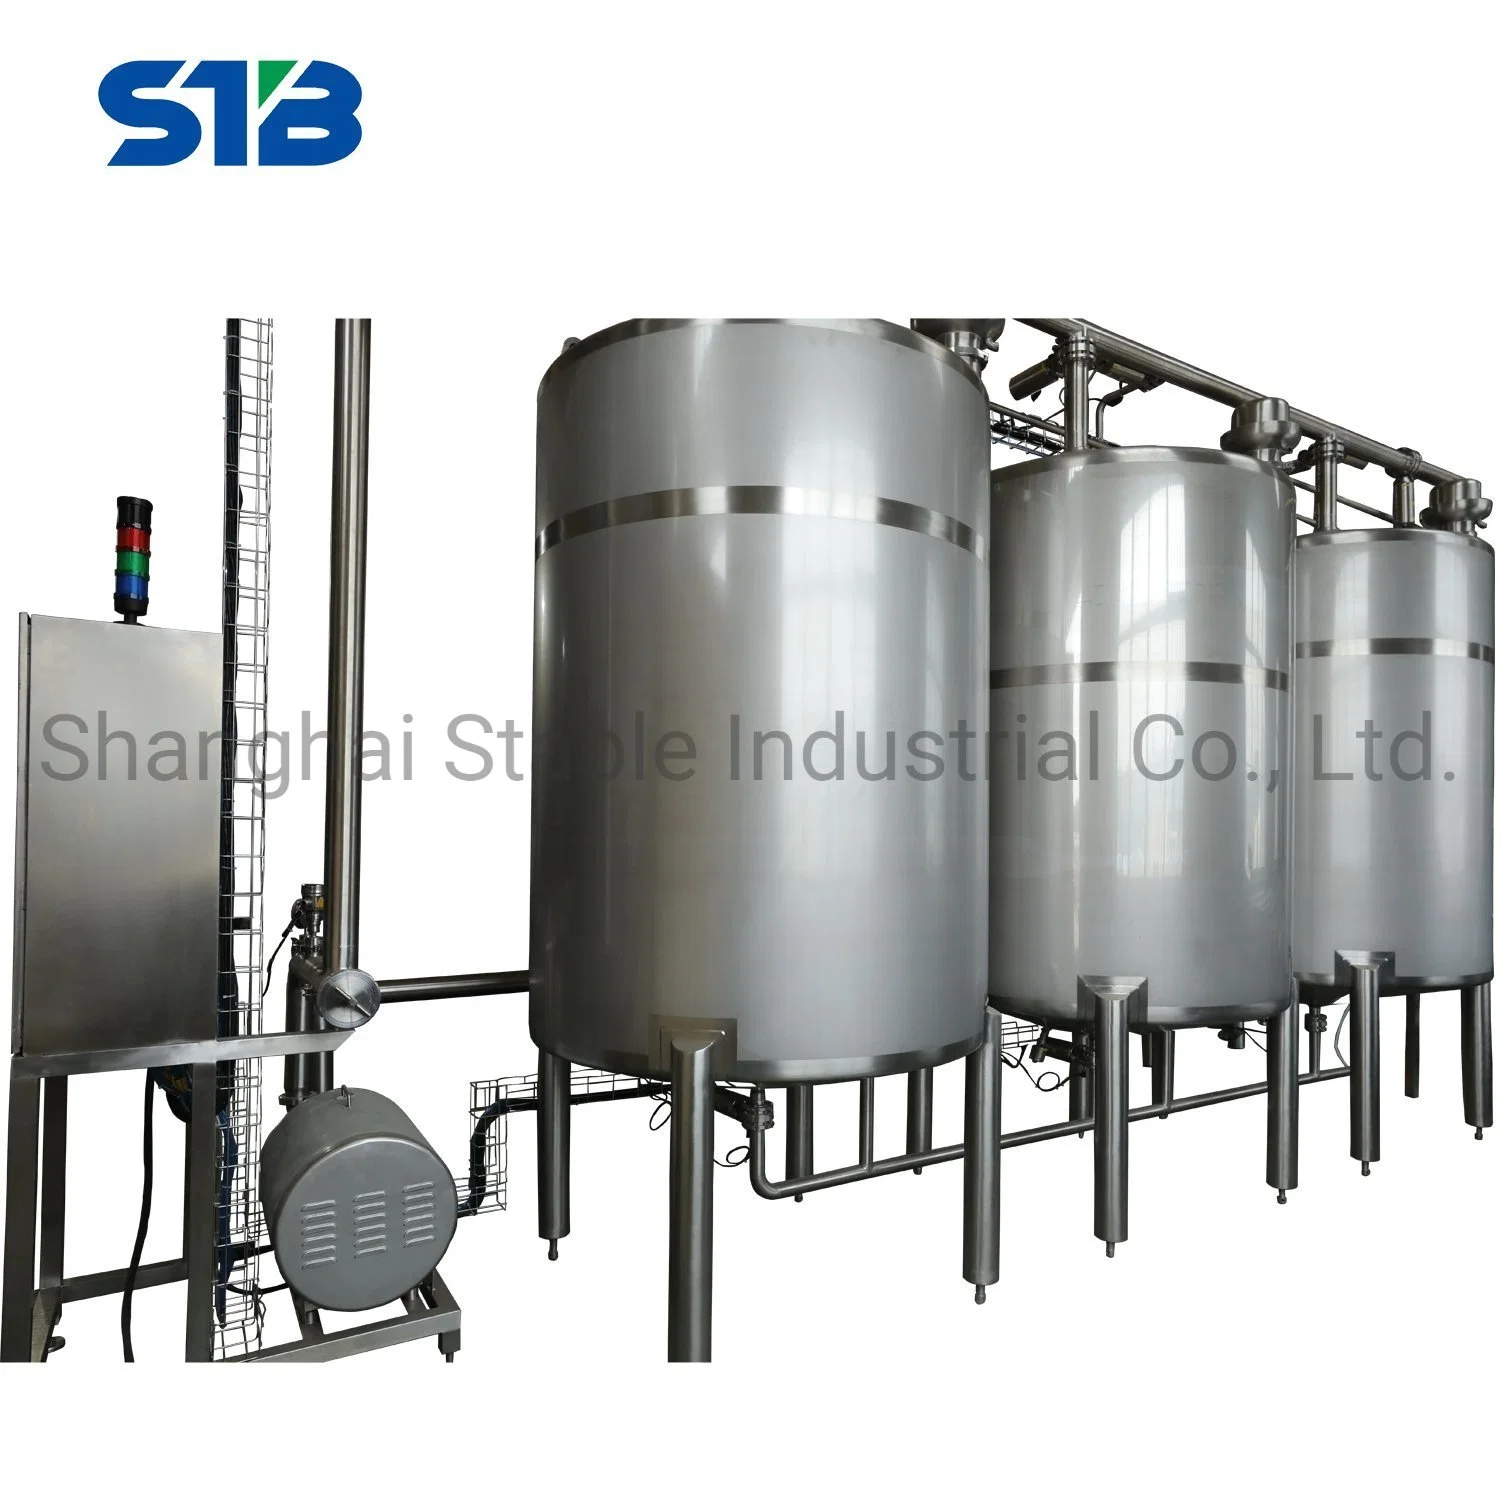 Automatic Clean in Place (CIP) System/Cleaning Vessel System/ Clean in Place (CIP) Machinery for Food Plant